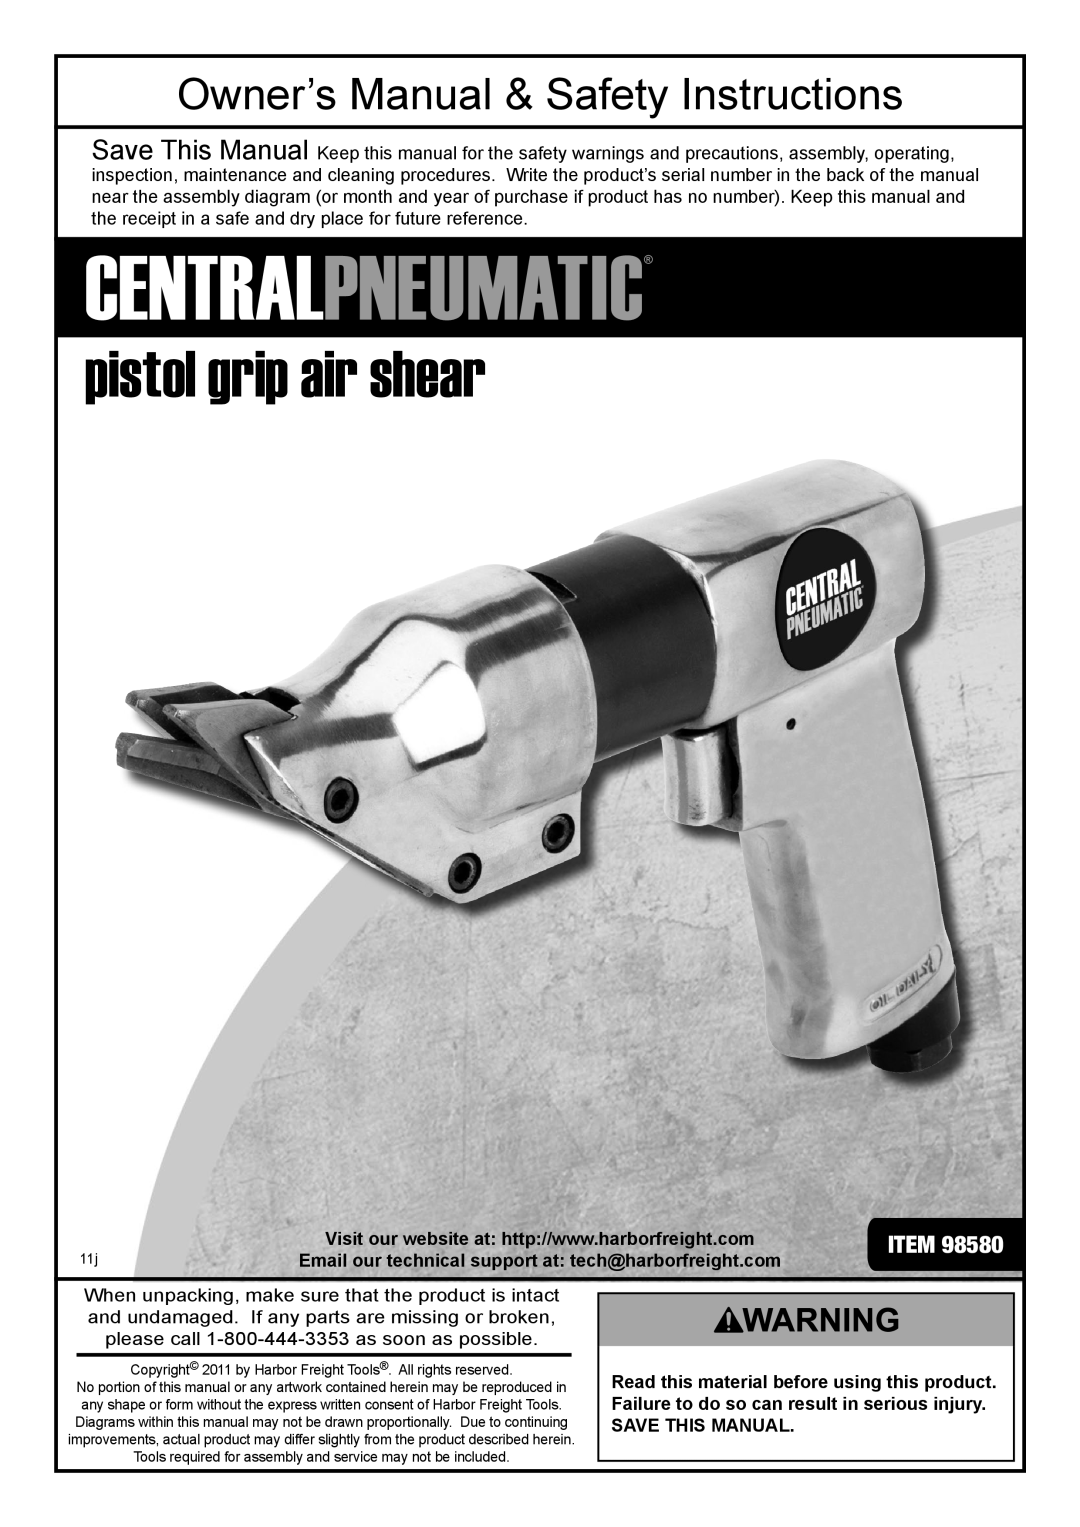 United States Pumice Company 98580 manual pistol grip air shear, Owner’s Manual & Safety Instructions 